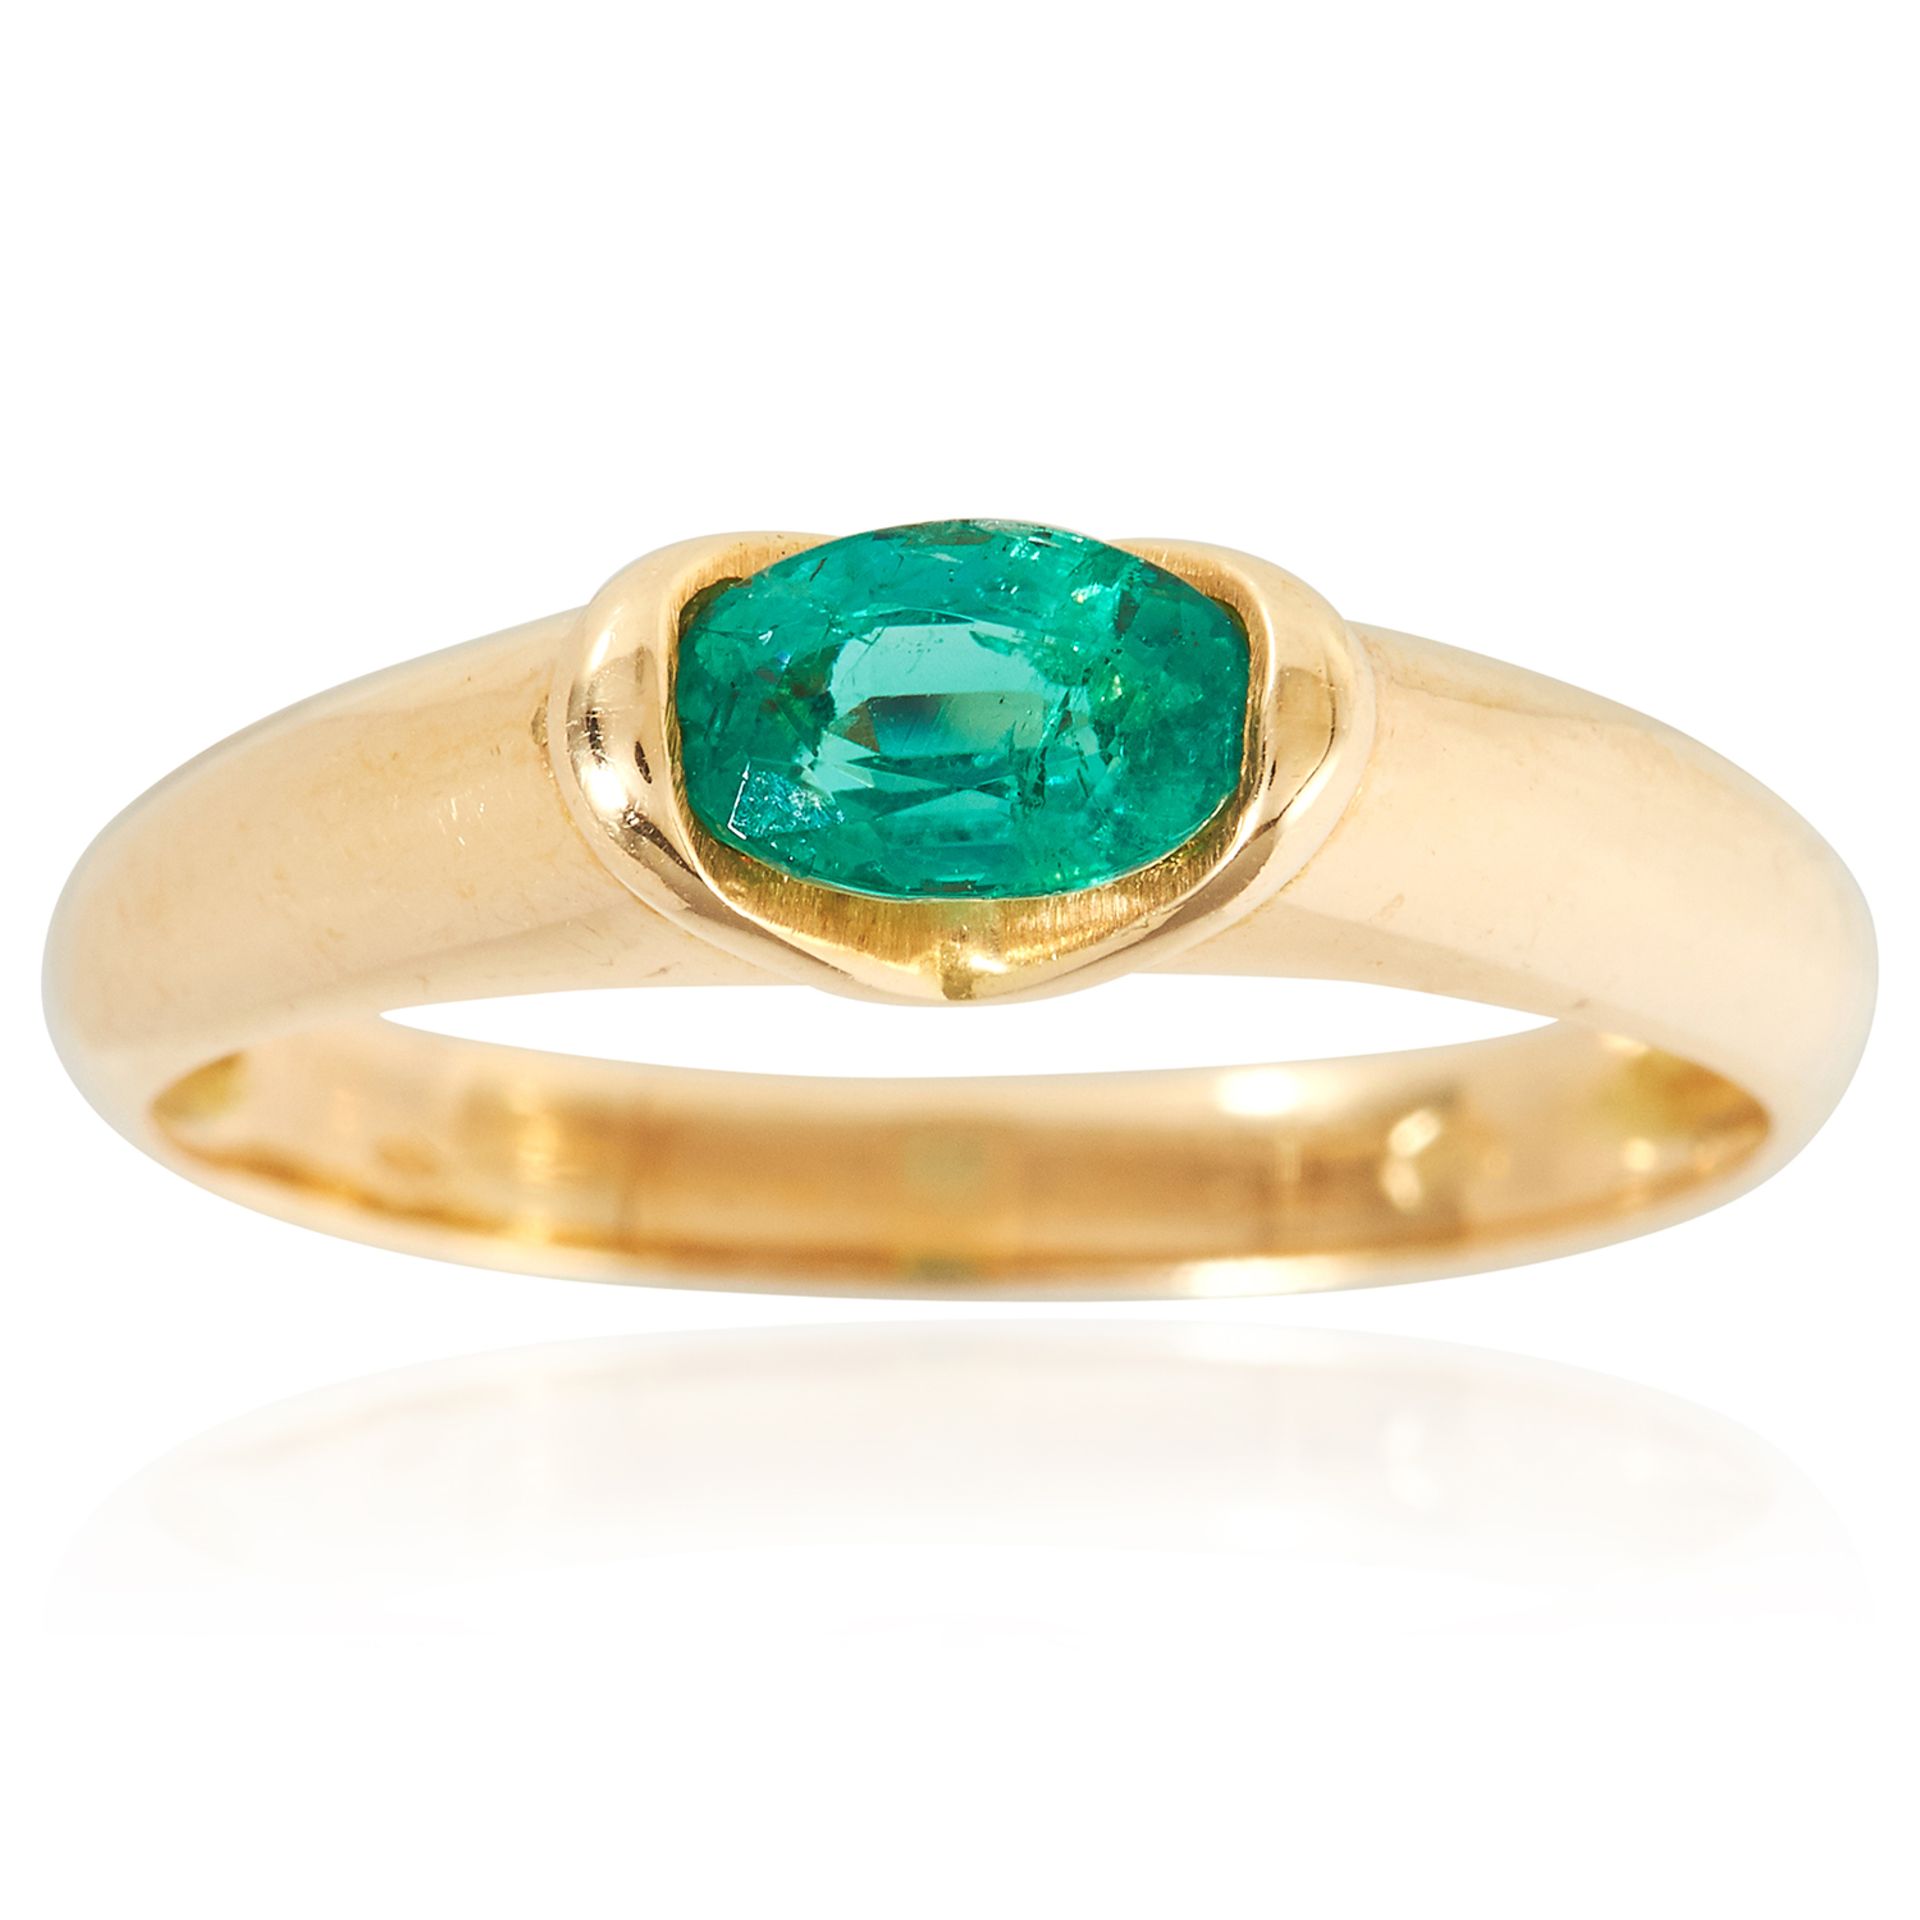 AN EMERALD DRESS RING in 18ct yellow gold, set with an oval cut emerald within a plain band,